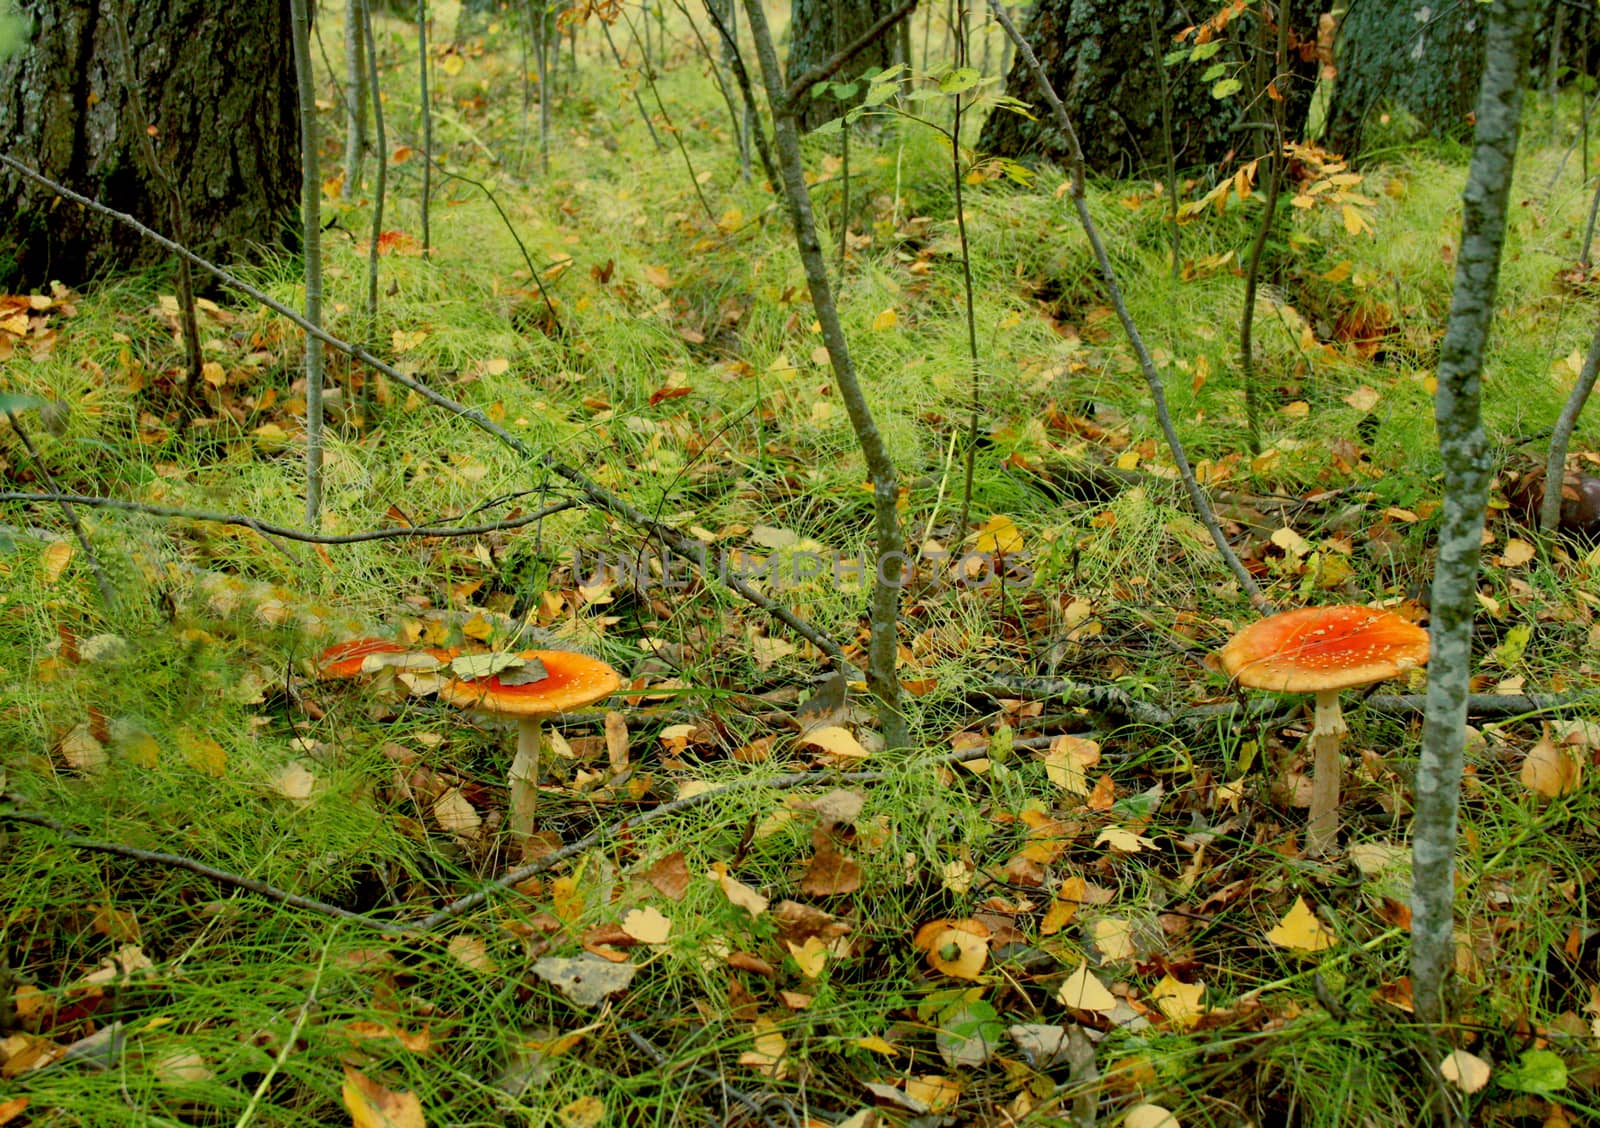 Three mushroom fly agaric in the grass on the forest glade